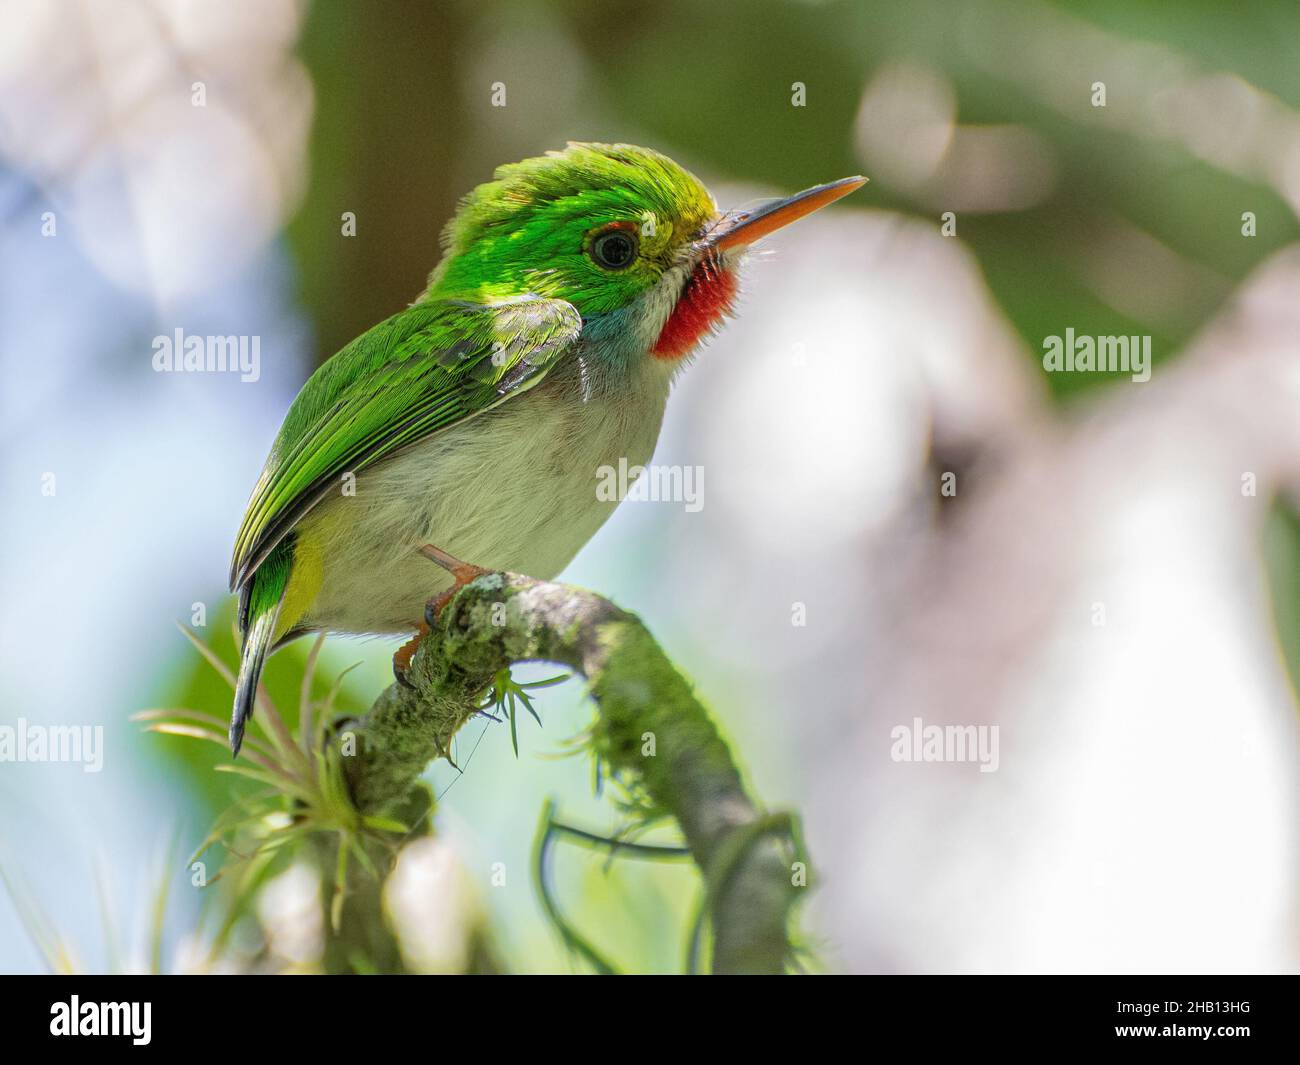 Selective focus shot of a cute Cuban tody bird perched on a tree branch during daylight Stock Photo